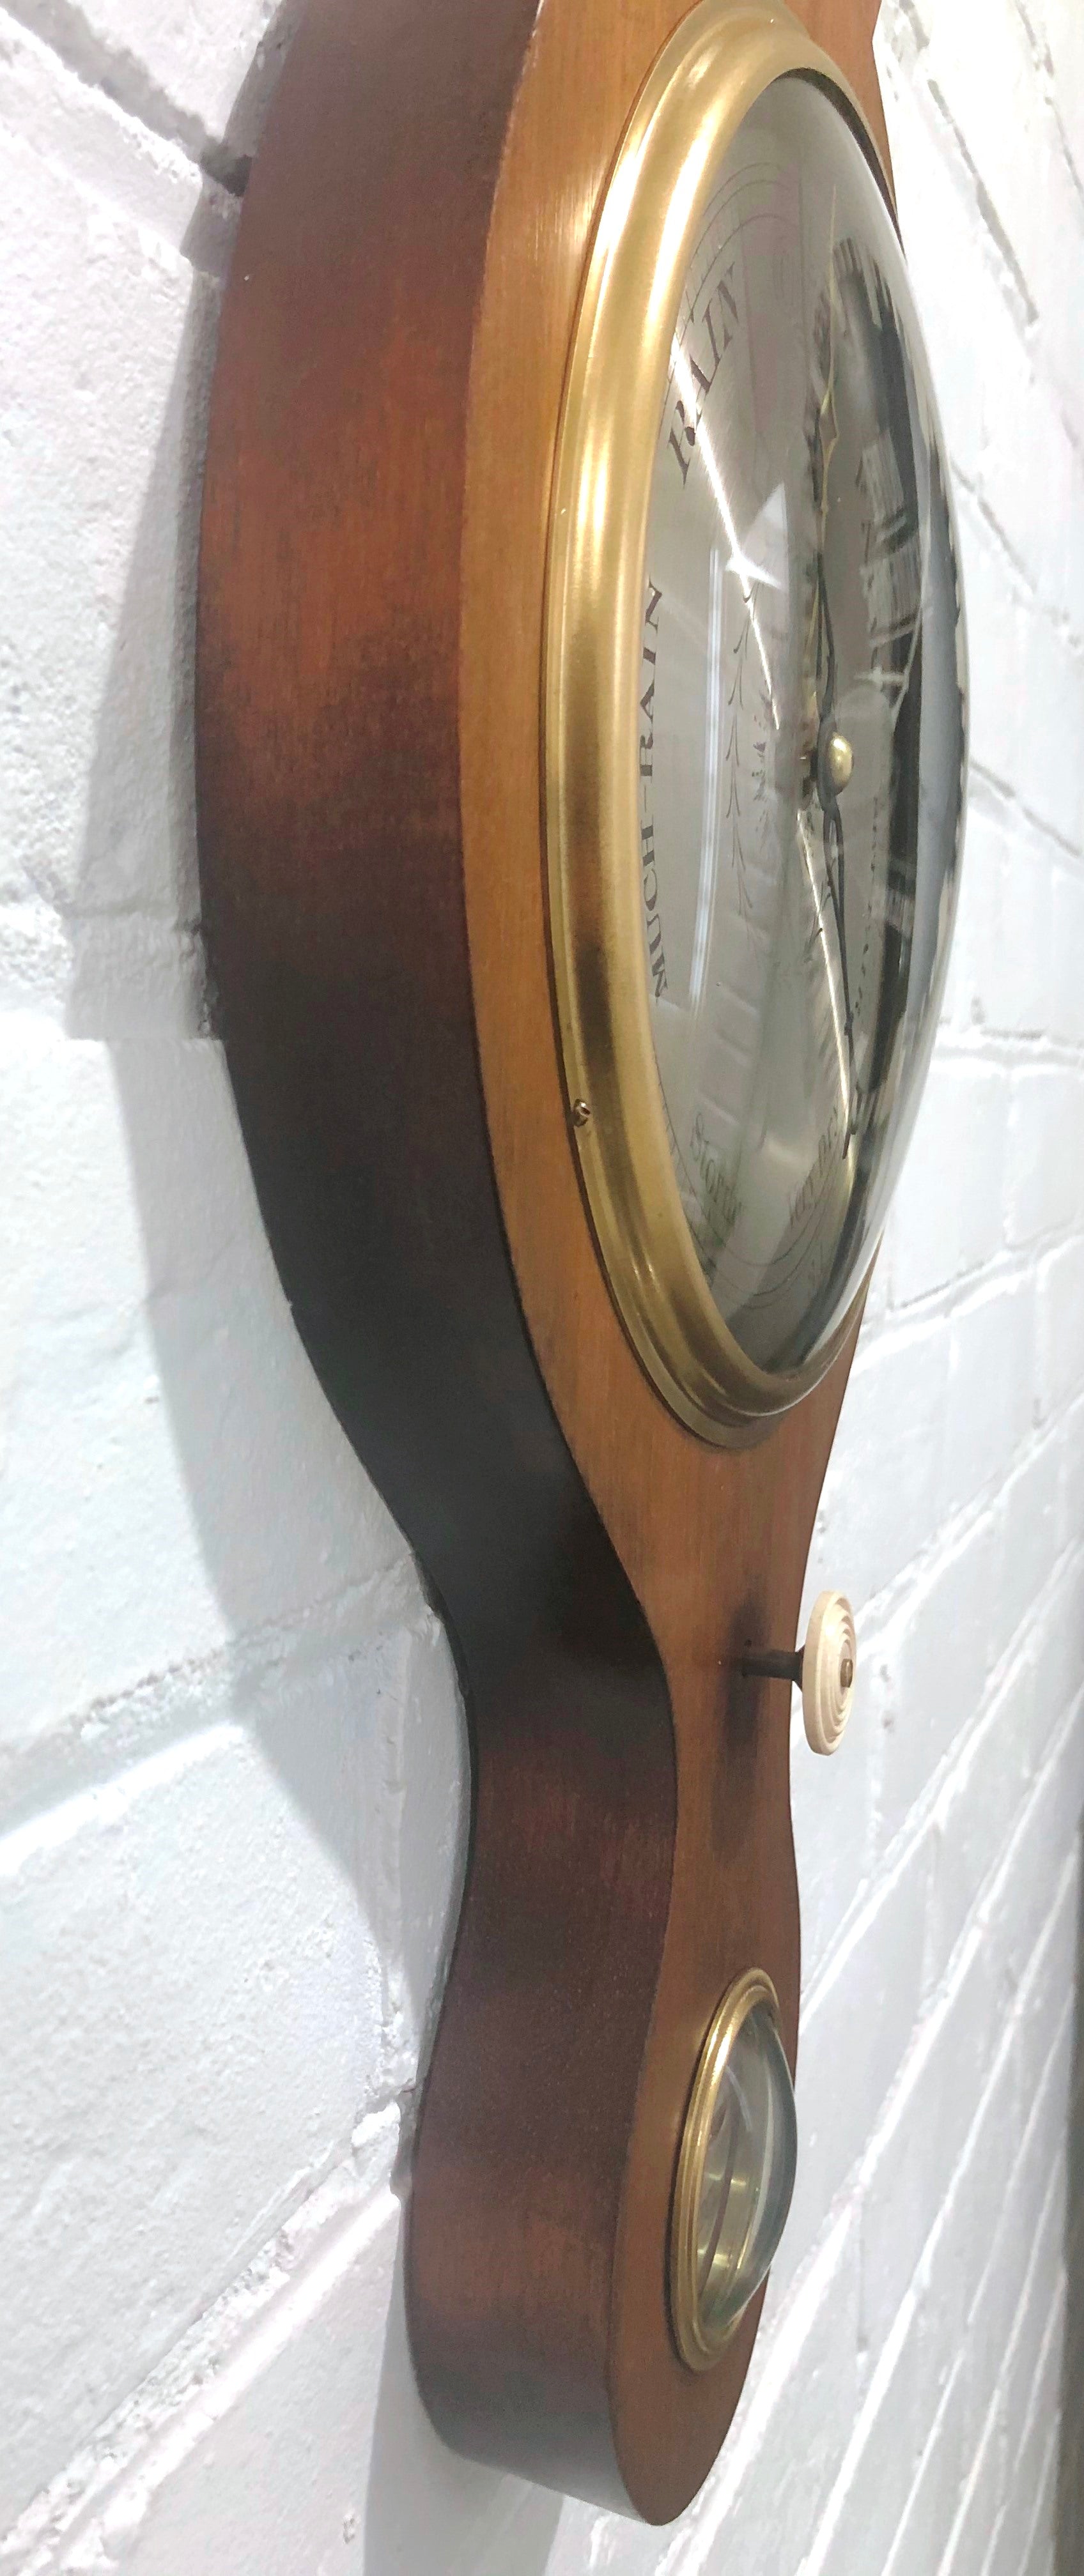 Antique five dial Wheel Banjo Barometer, Thermometer & Hygrometer | eXibit collection